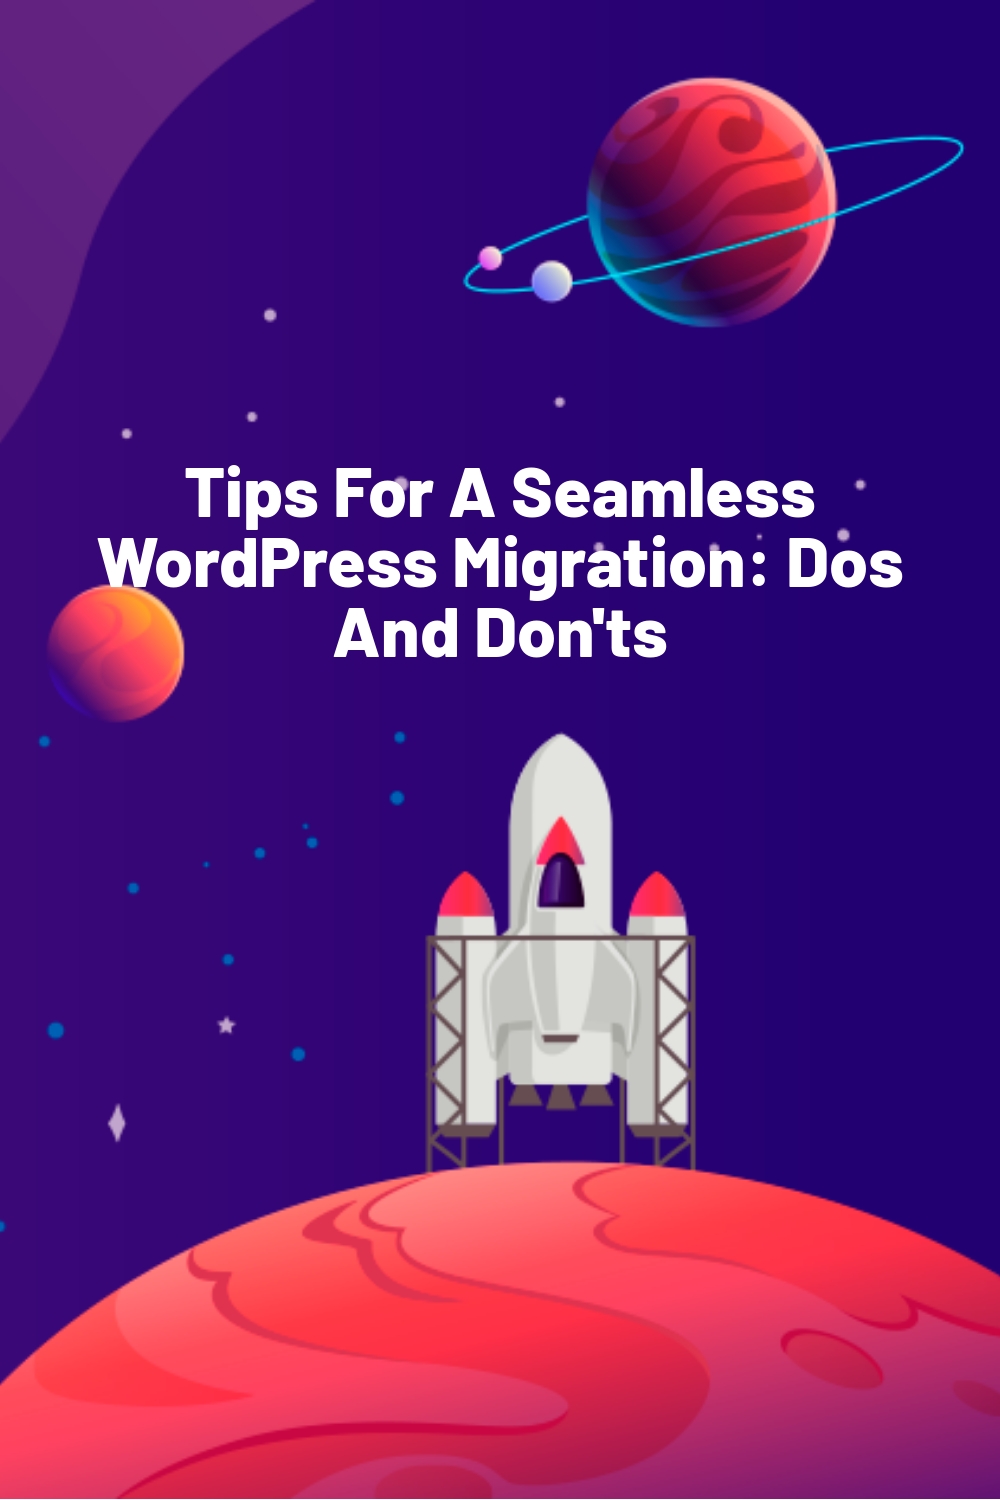 Tips For A Seamless WordPress Migration: Dos And Don’ts